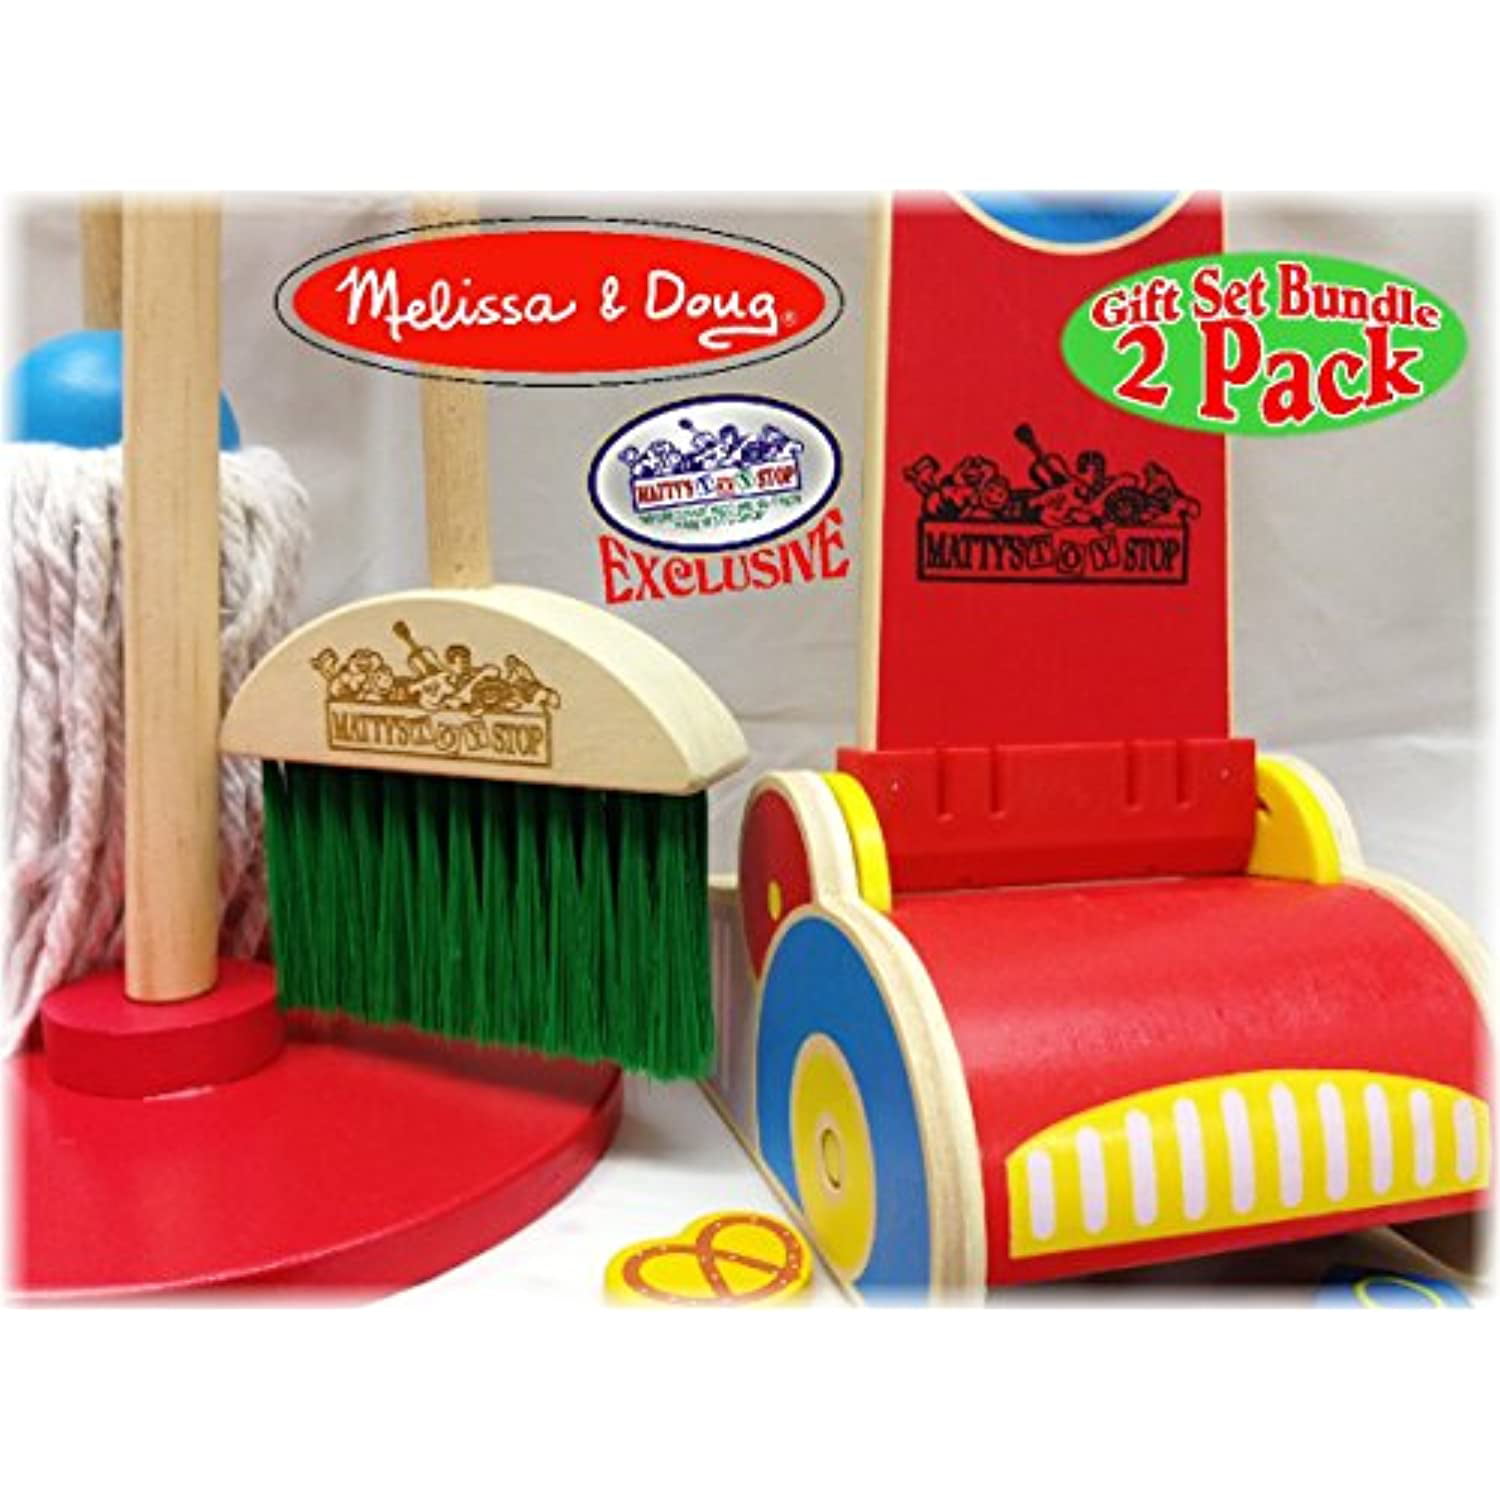 Melissa & Doug Kids Cleaning Set 6 pieces - Fun and education! unisex  (bambini)